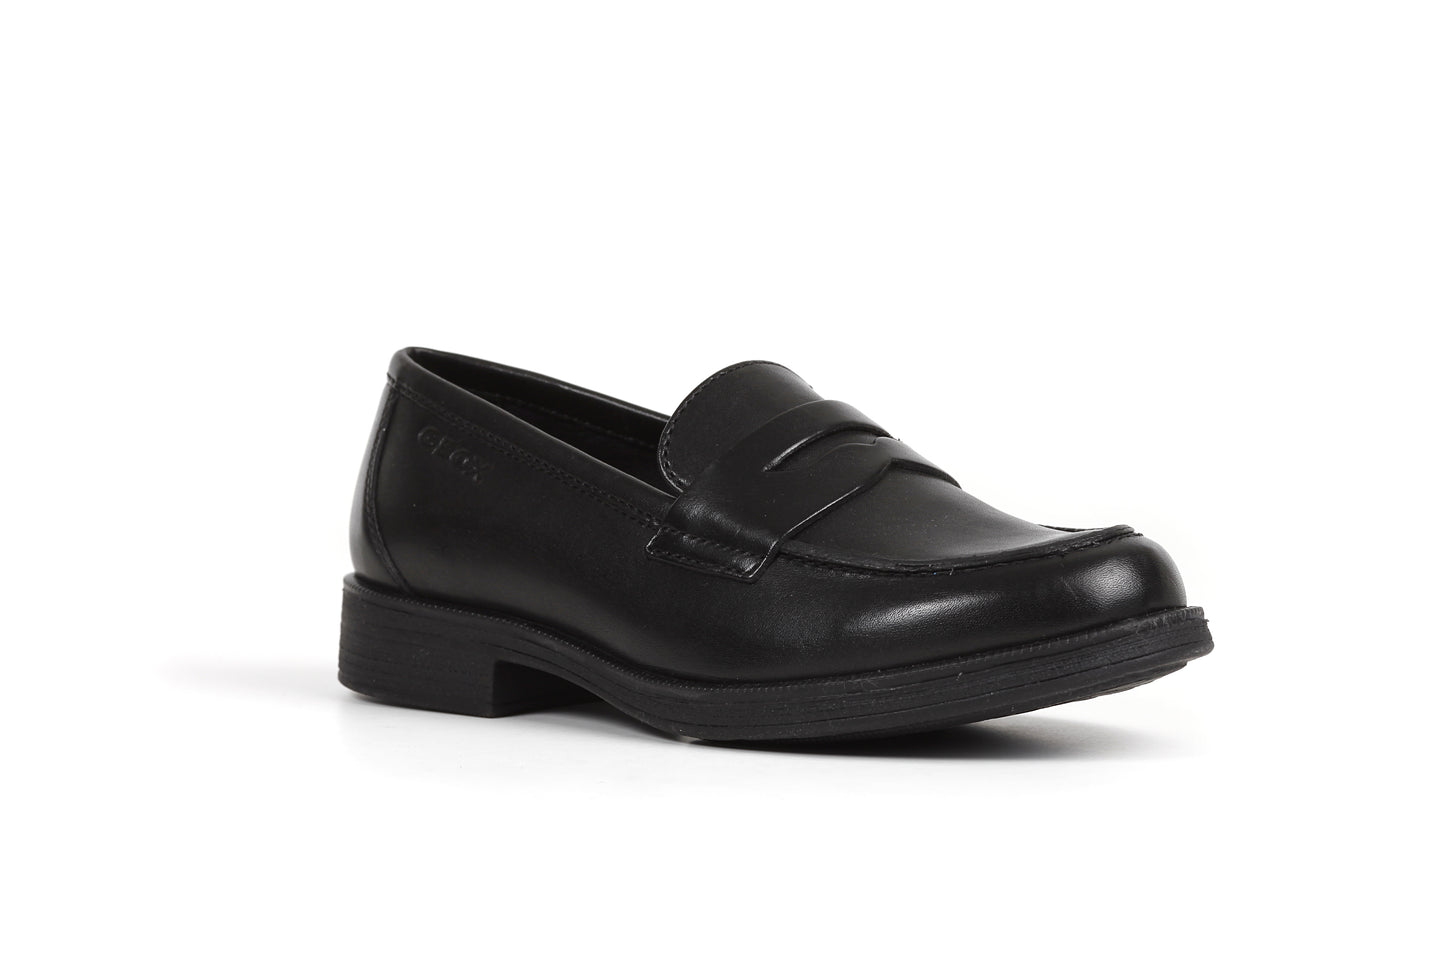 Geox Agata Black Leather Loafers